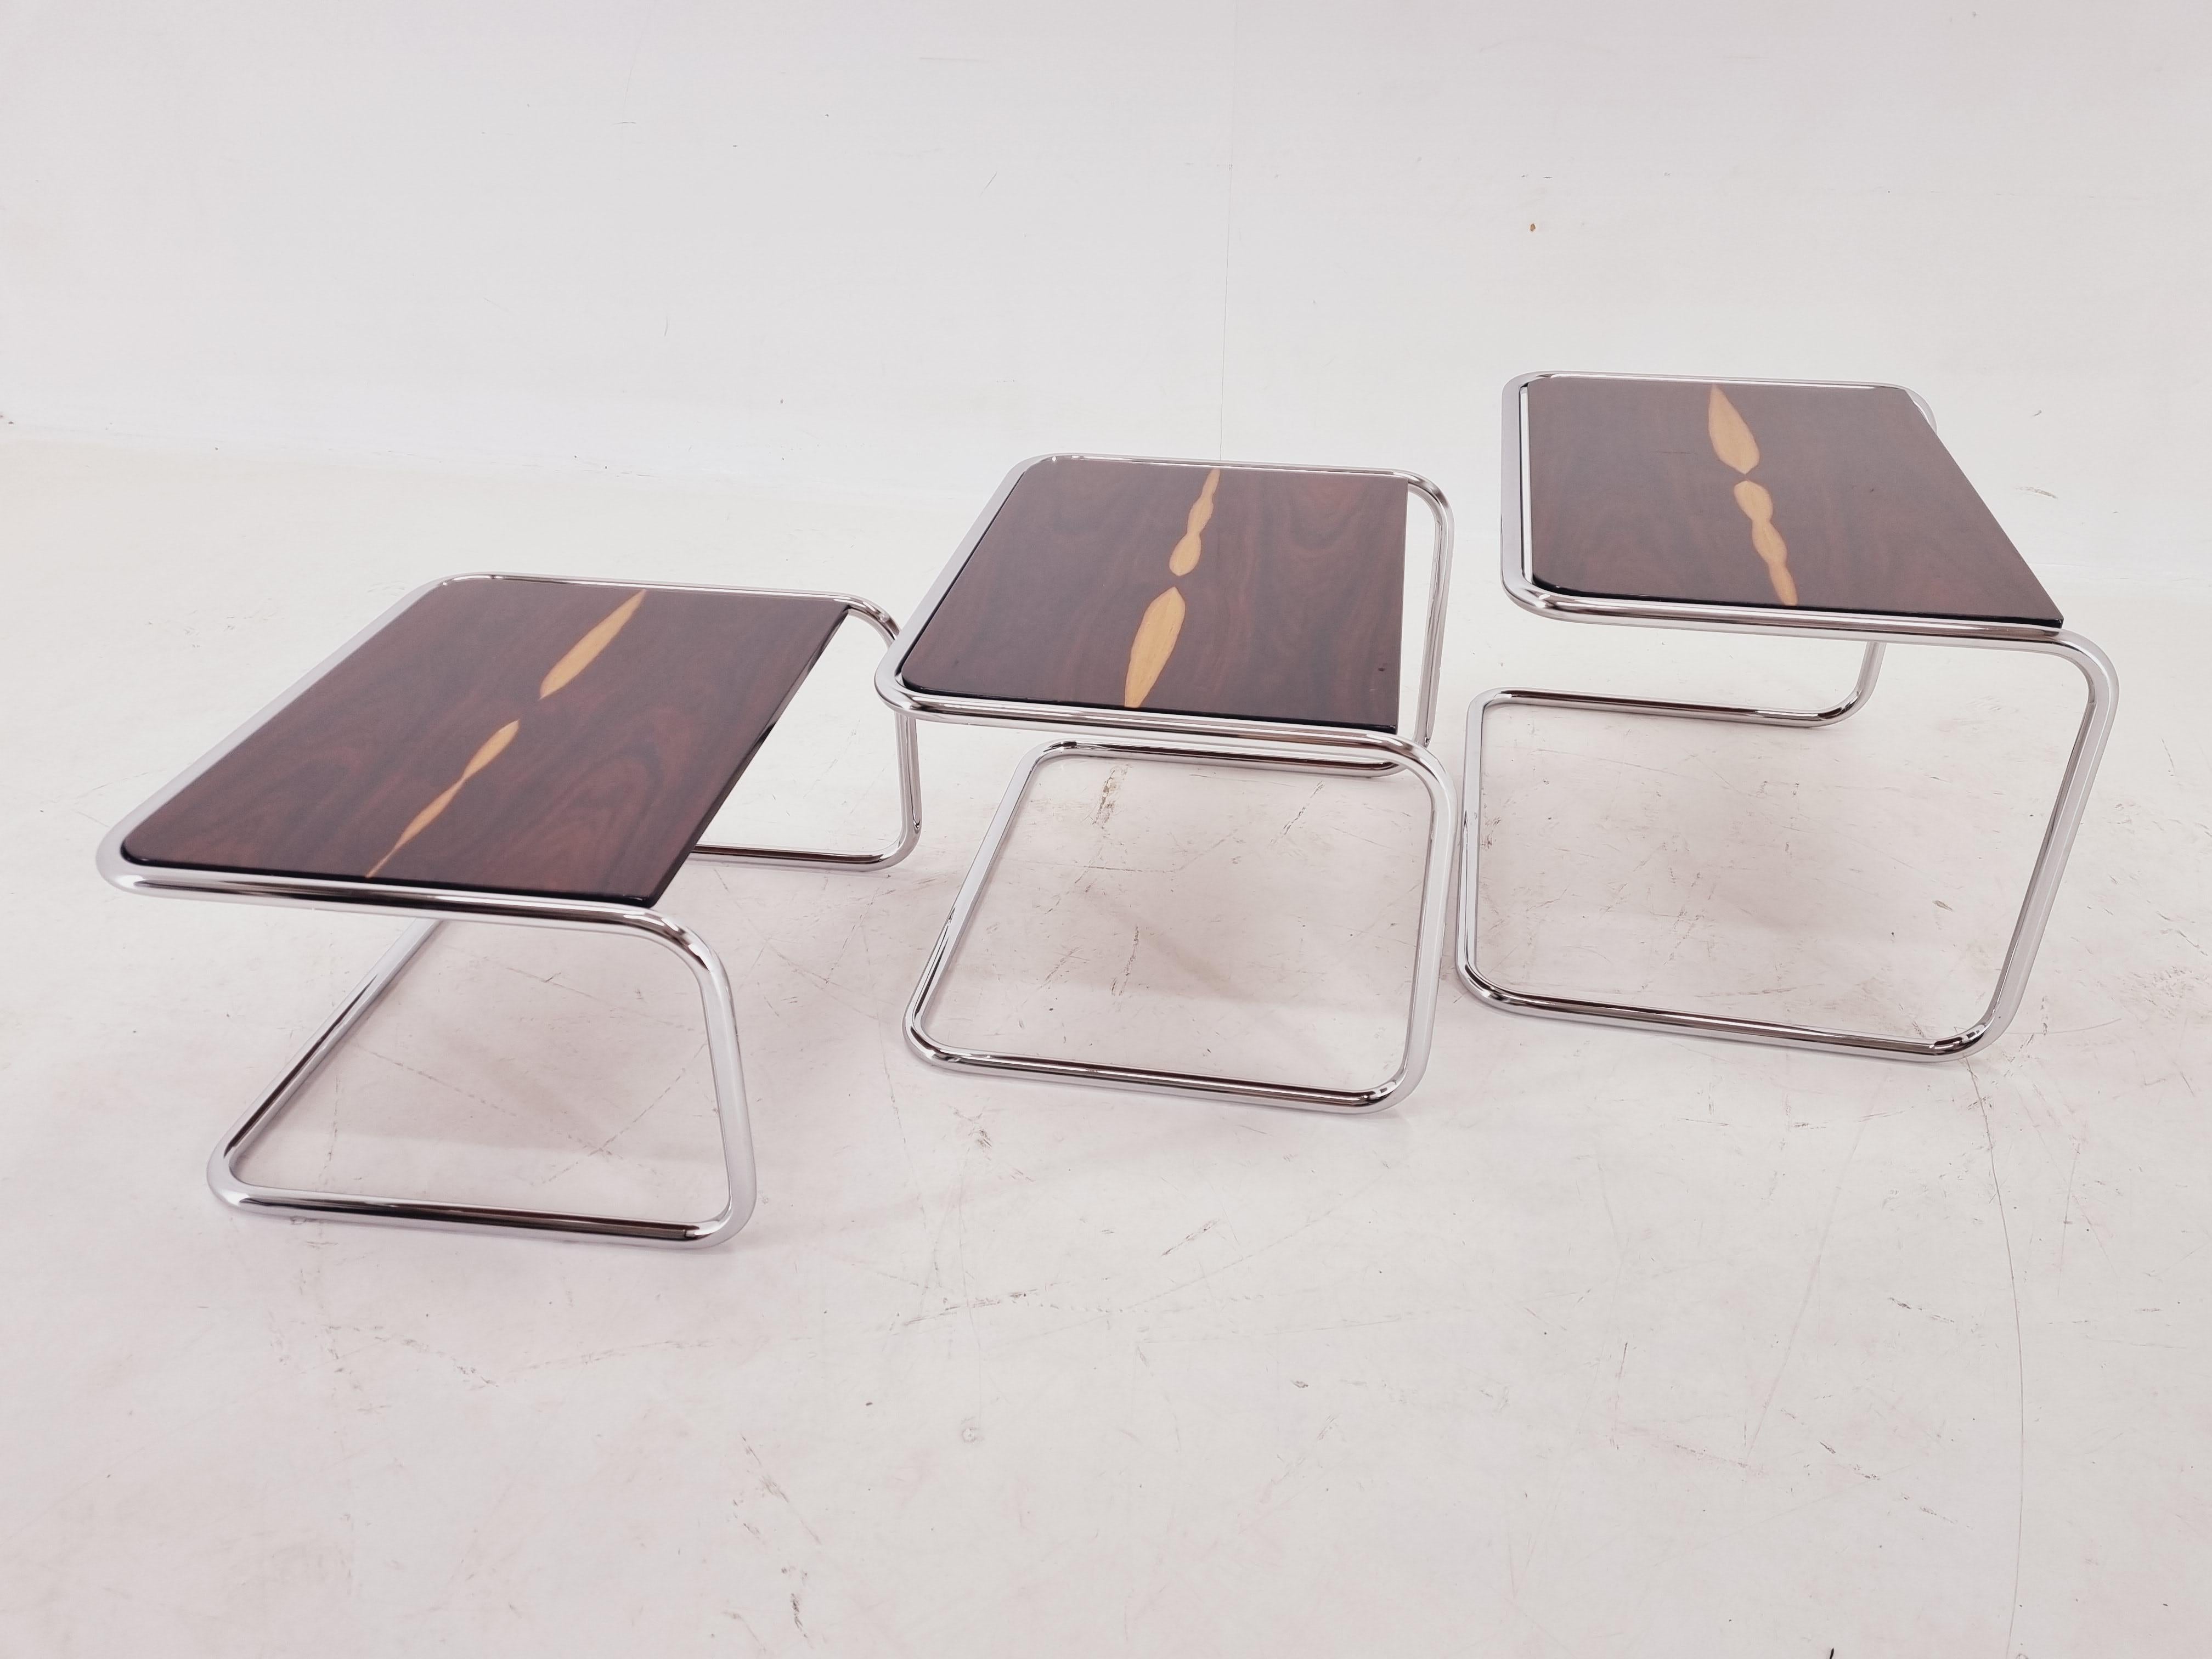 Exclusive Rare Midcentury Nesting Tables, Cocobolo Palisandr and Chrome, 1950s. For Sale 7